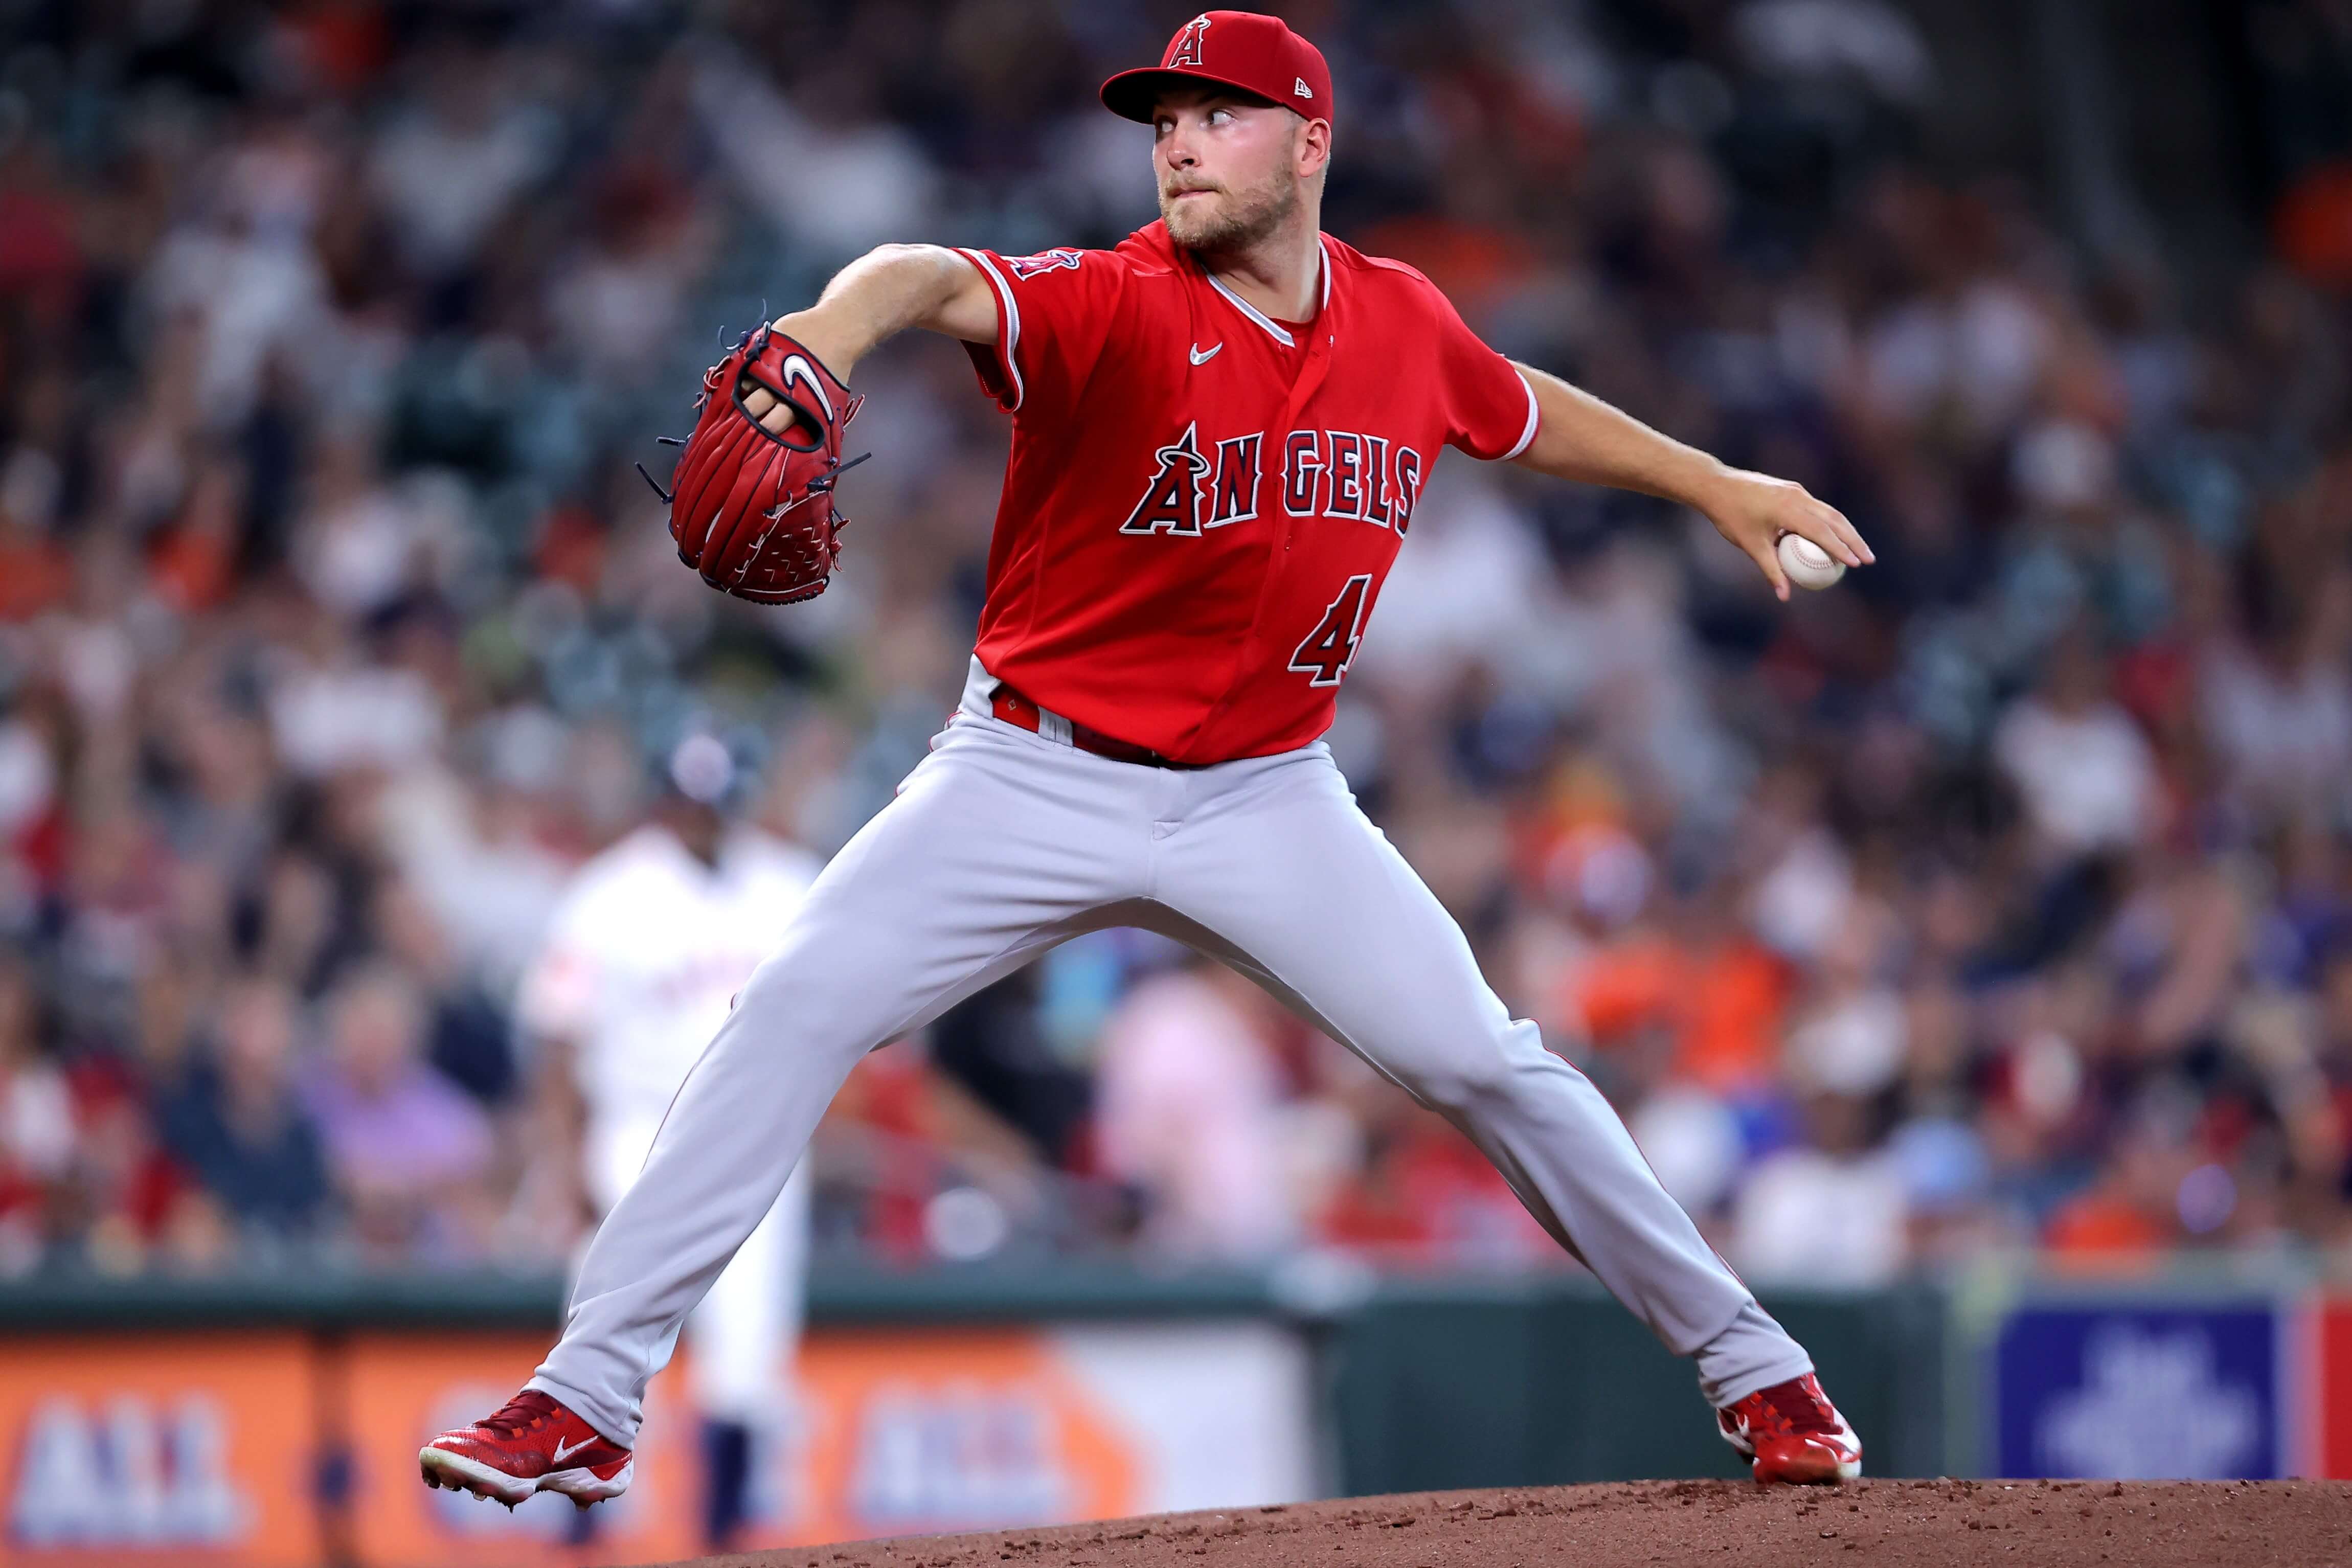 How To Bet - Cubs vs Angels Predictions, Picks, Odds: Third Time's Not a Charm for Detmers